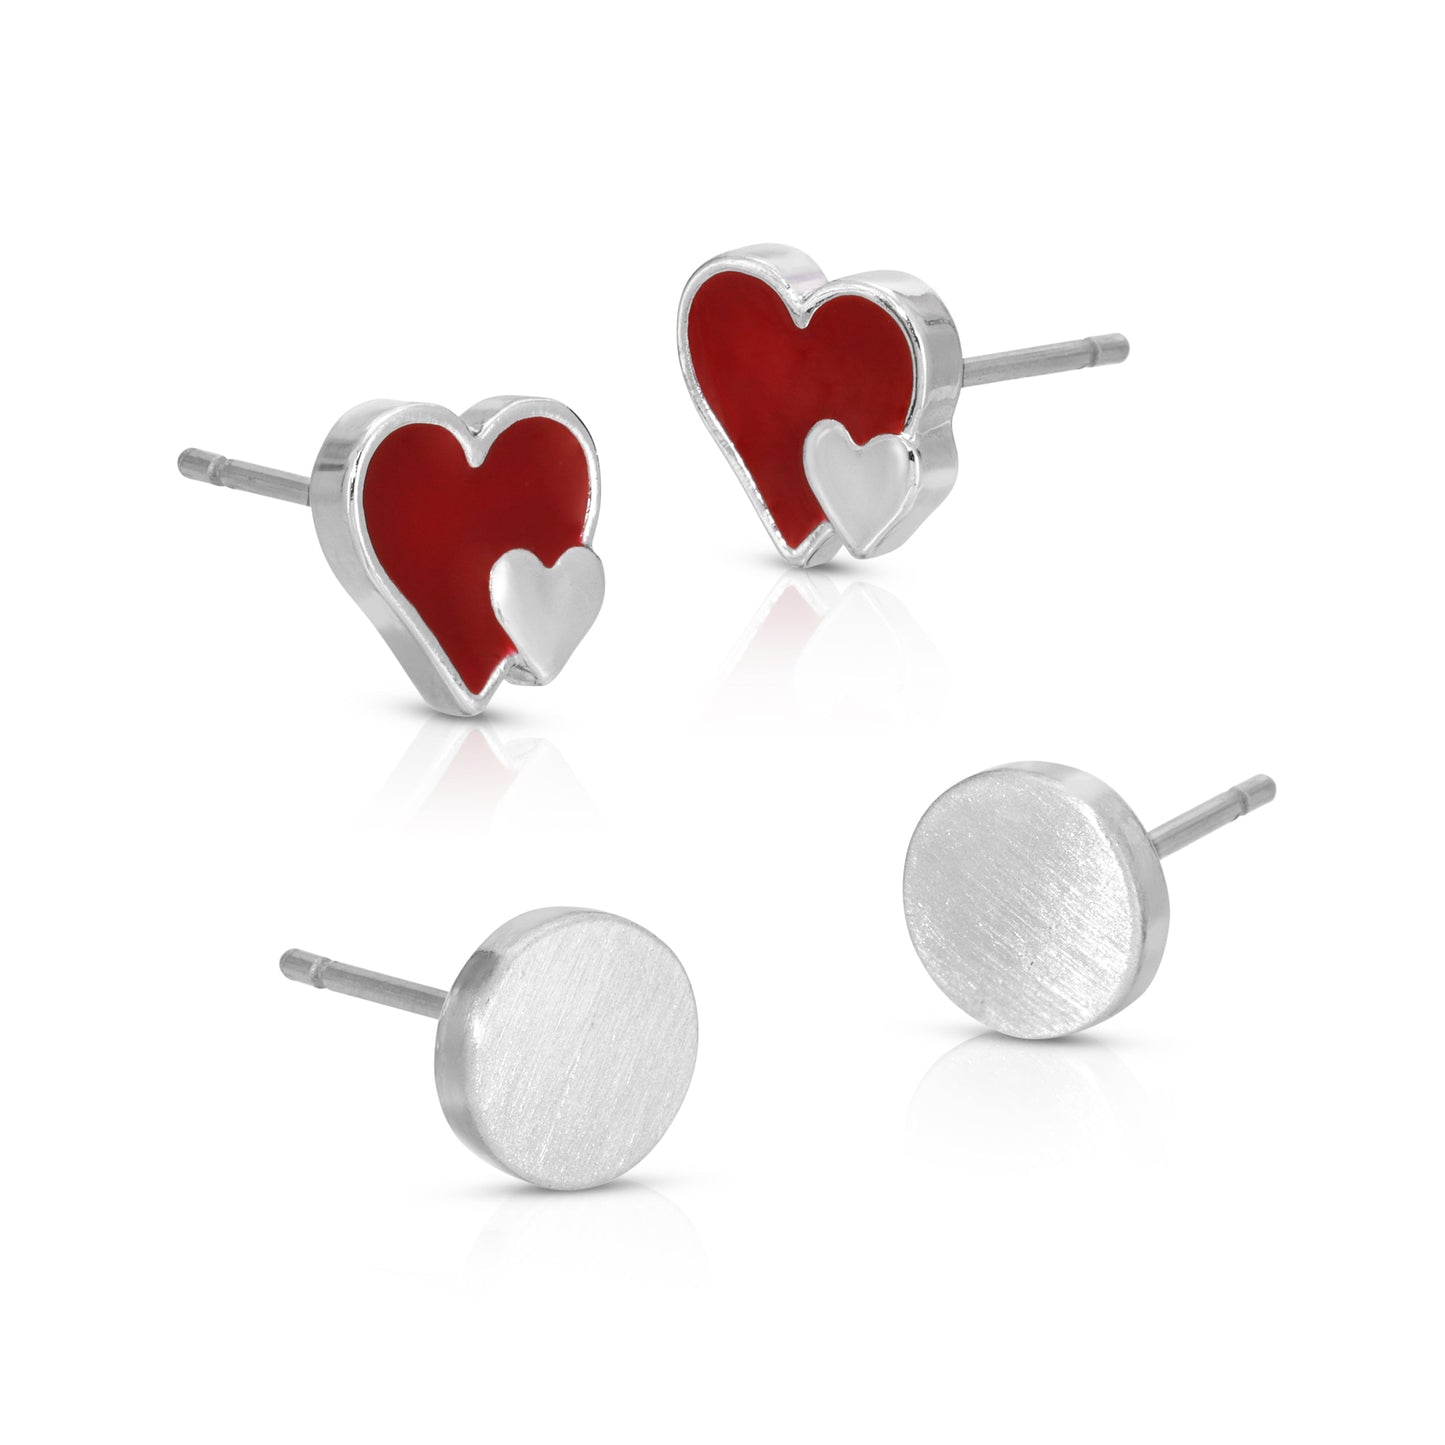 Extra Love Earring Set